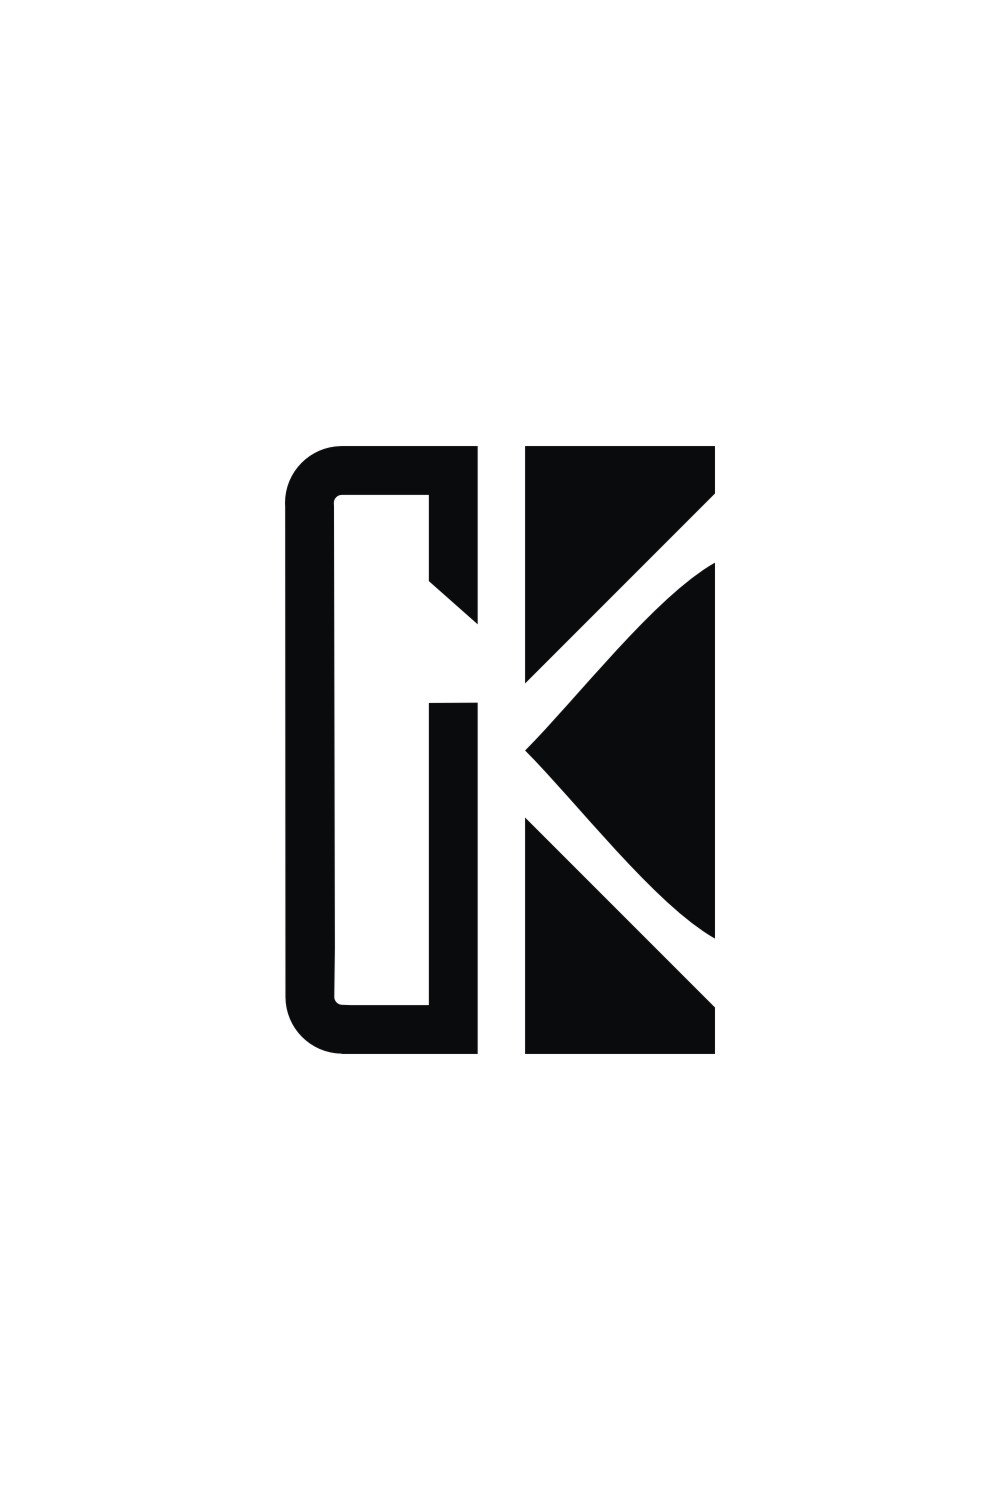 combined G and K logo pinterest preview image.